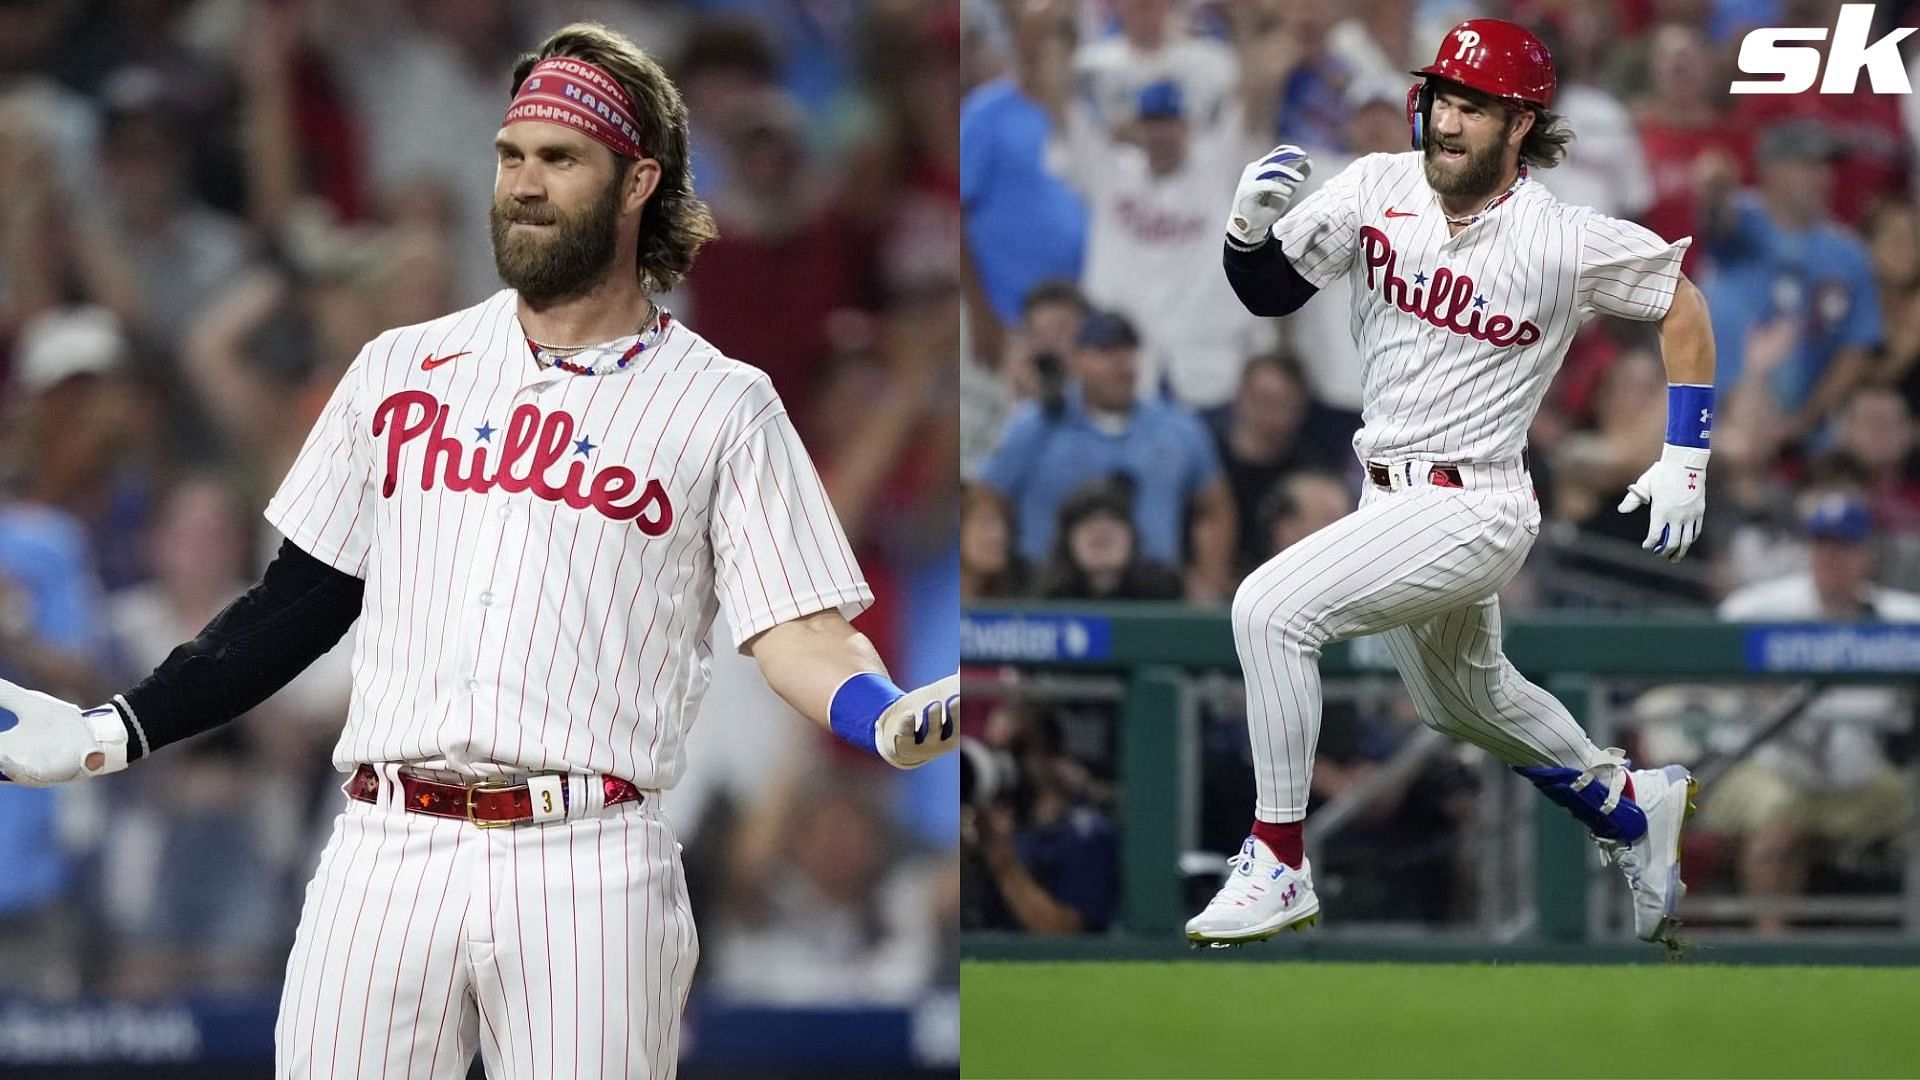 WATCH: Philadelphia Phillies superstar Bryce Harper pulls off incredible  inside the park home run against San Francisco Giants